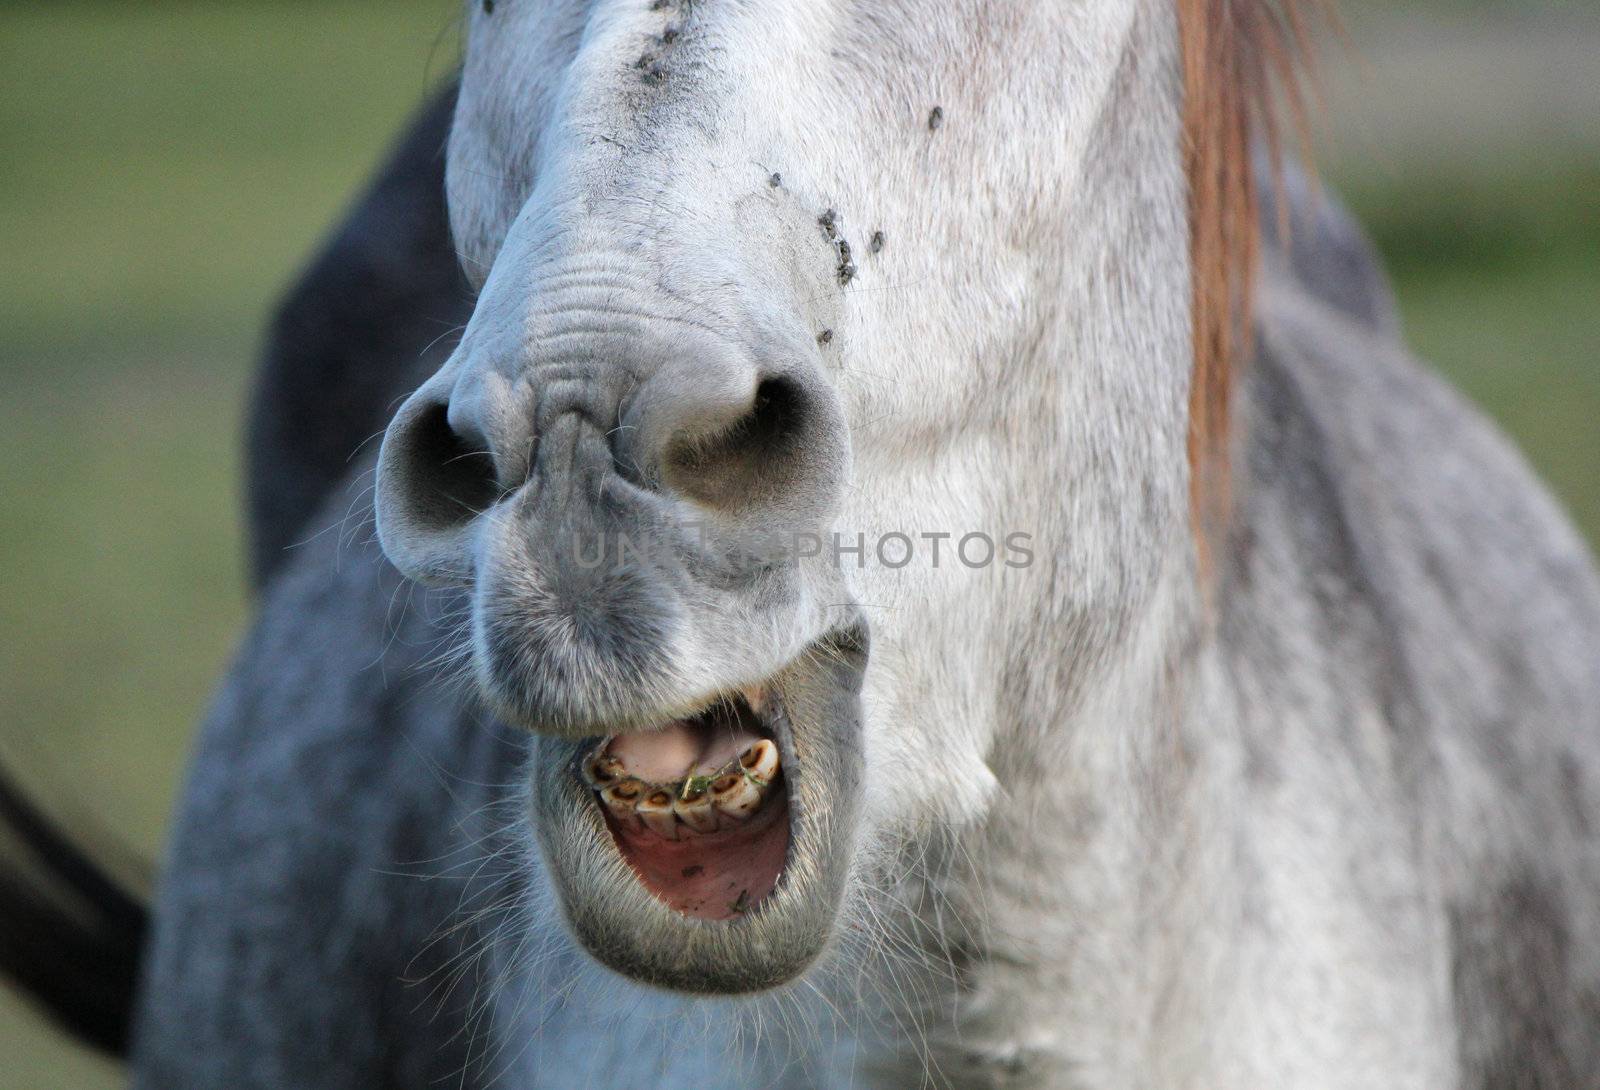 Unhappy donkey showing its teeth while braying by Elenaphotos21